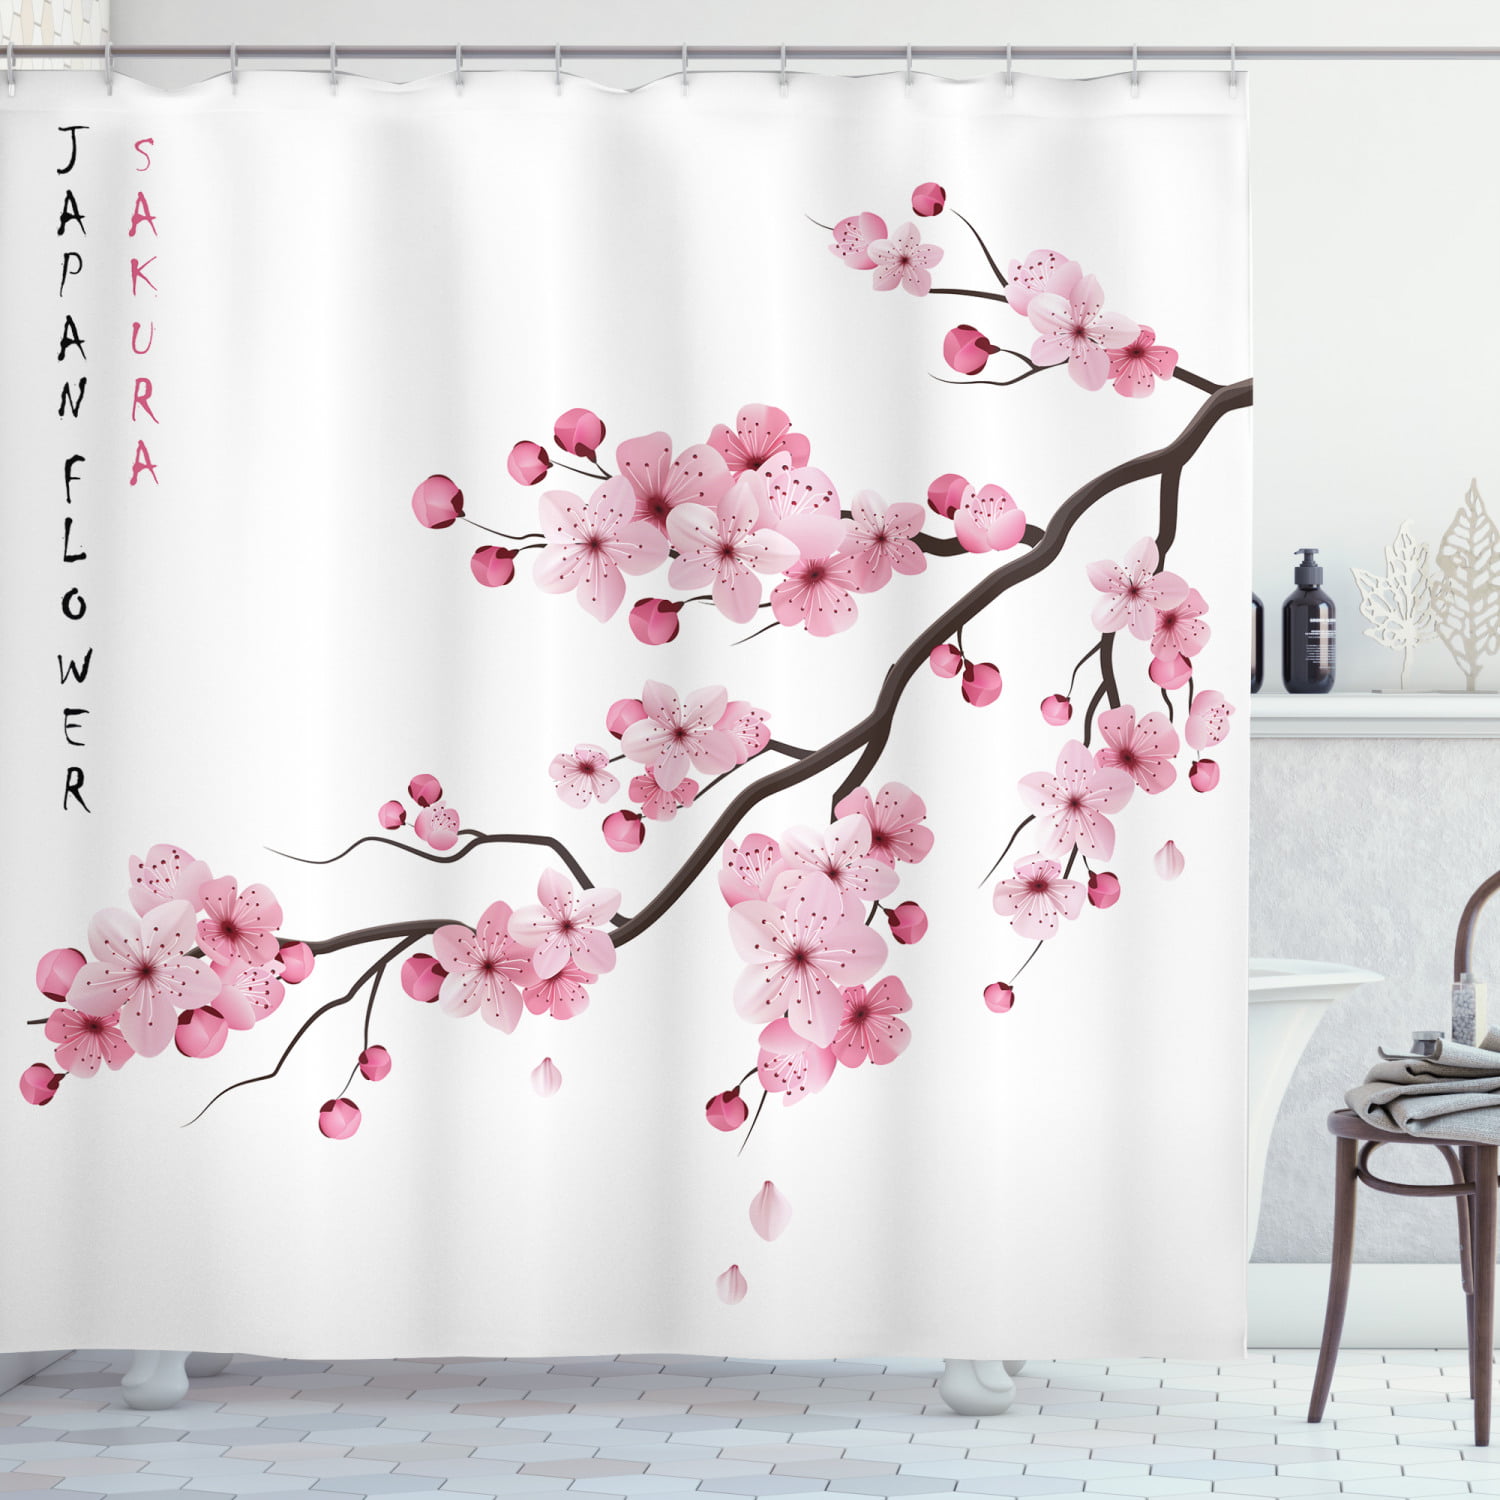 Details about   Boho Shower Curtain Asian Elements Floral Print for Bathroom 